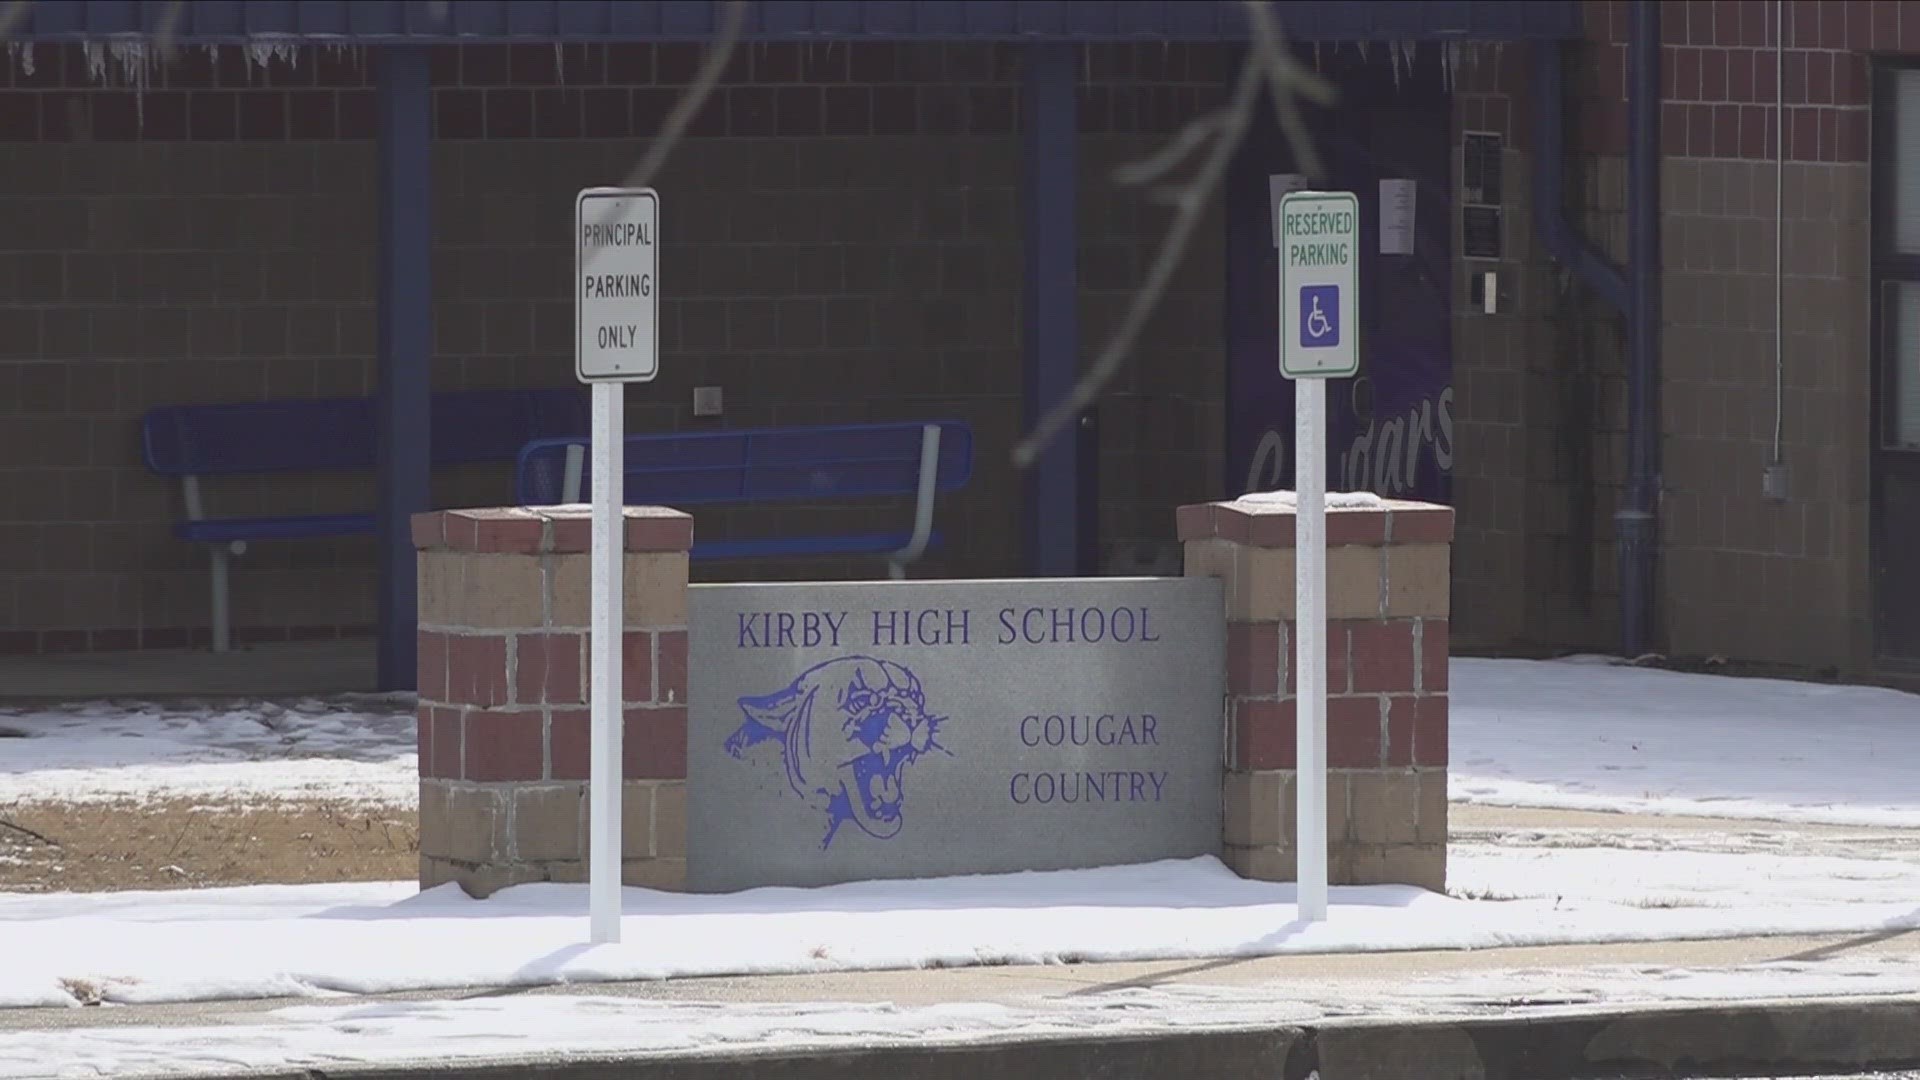 Memphis-Shelby County Schools (MSCS) has confirmed that the majority of schools and office buildings in their district will reopen Tuesday, Jan. 23.